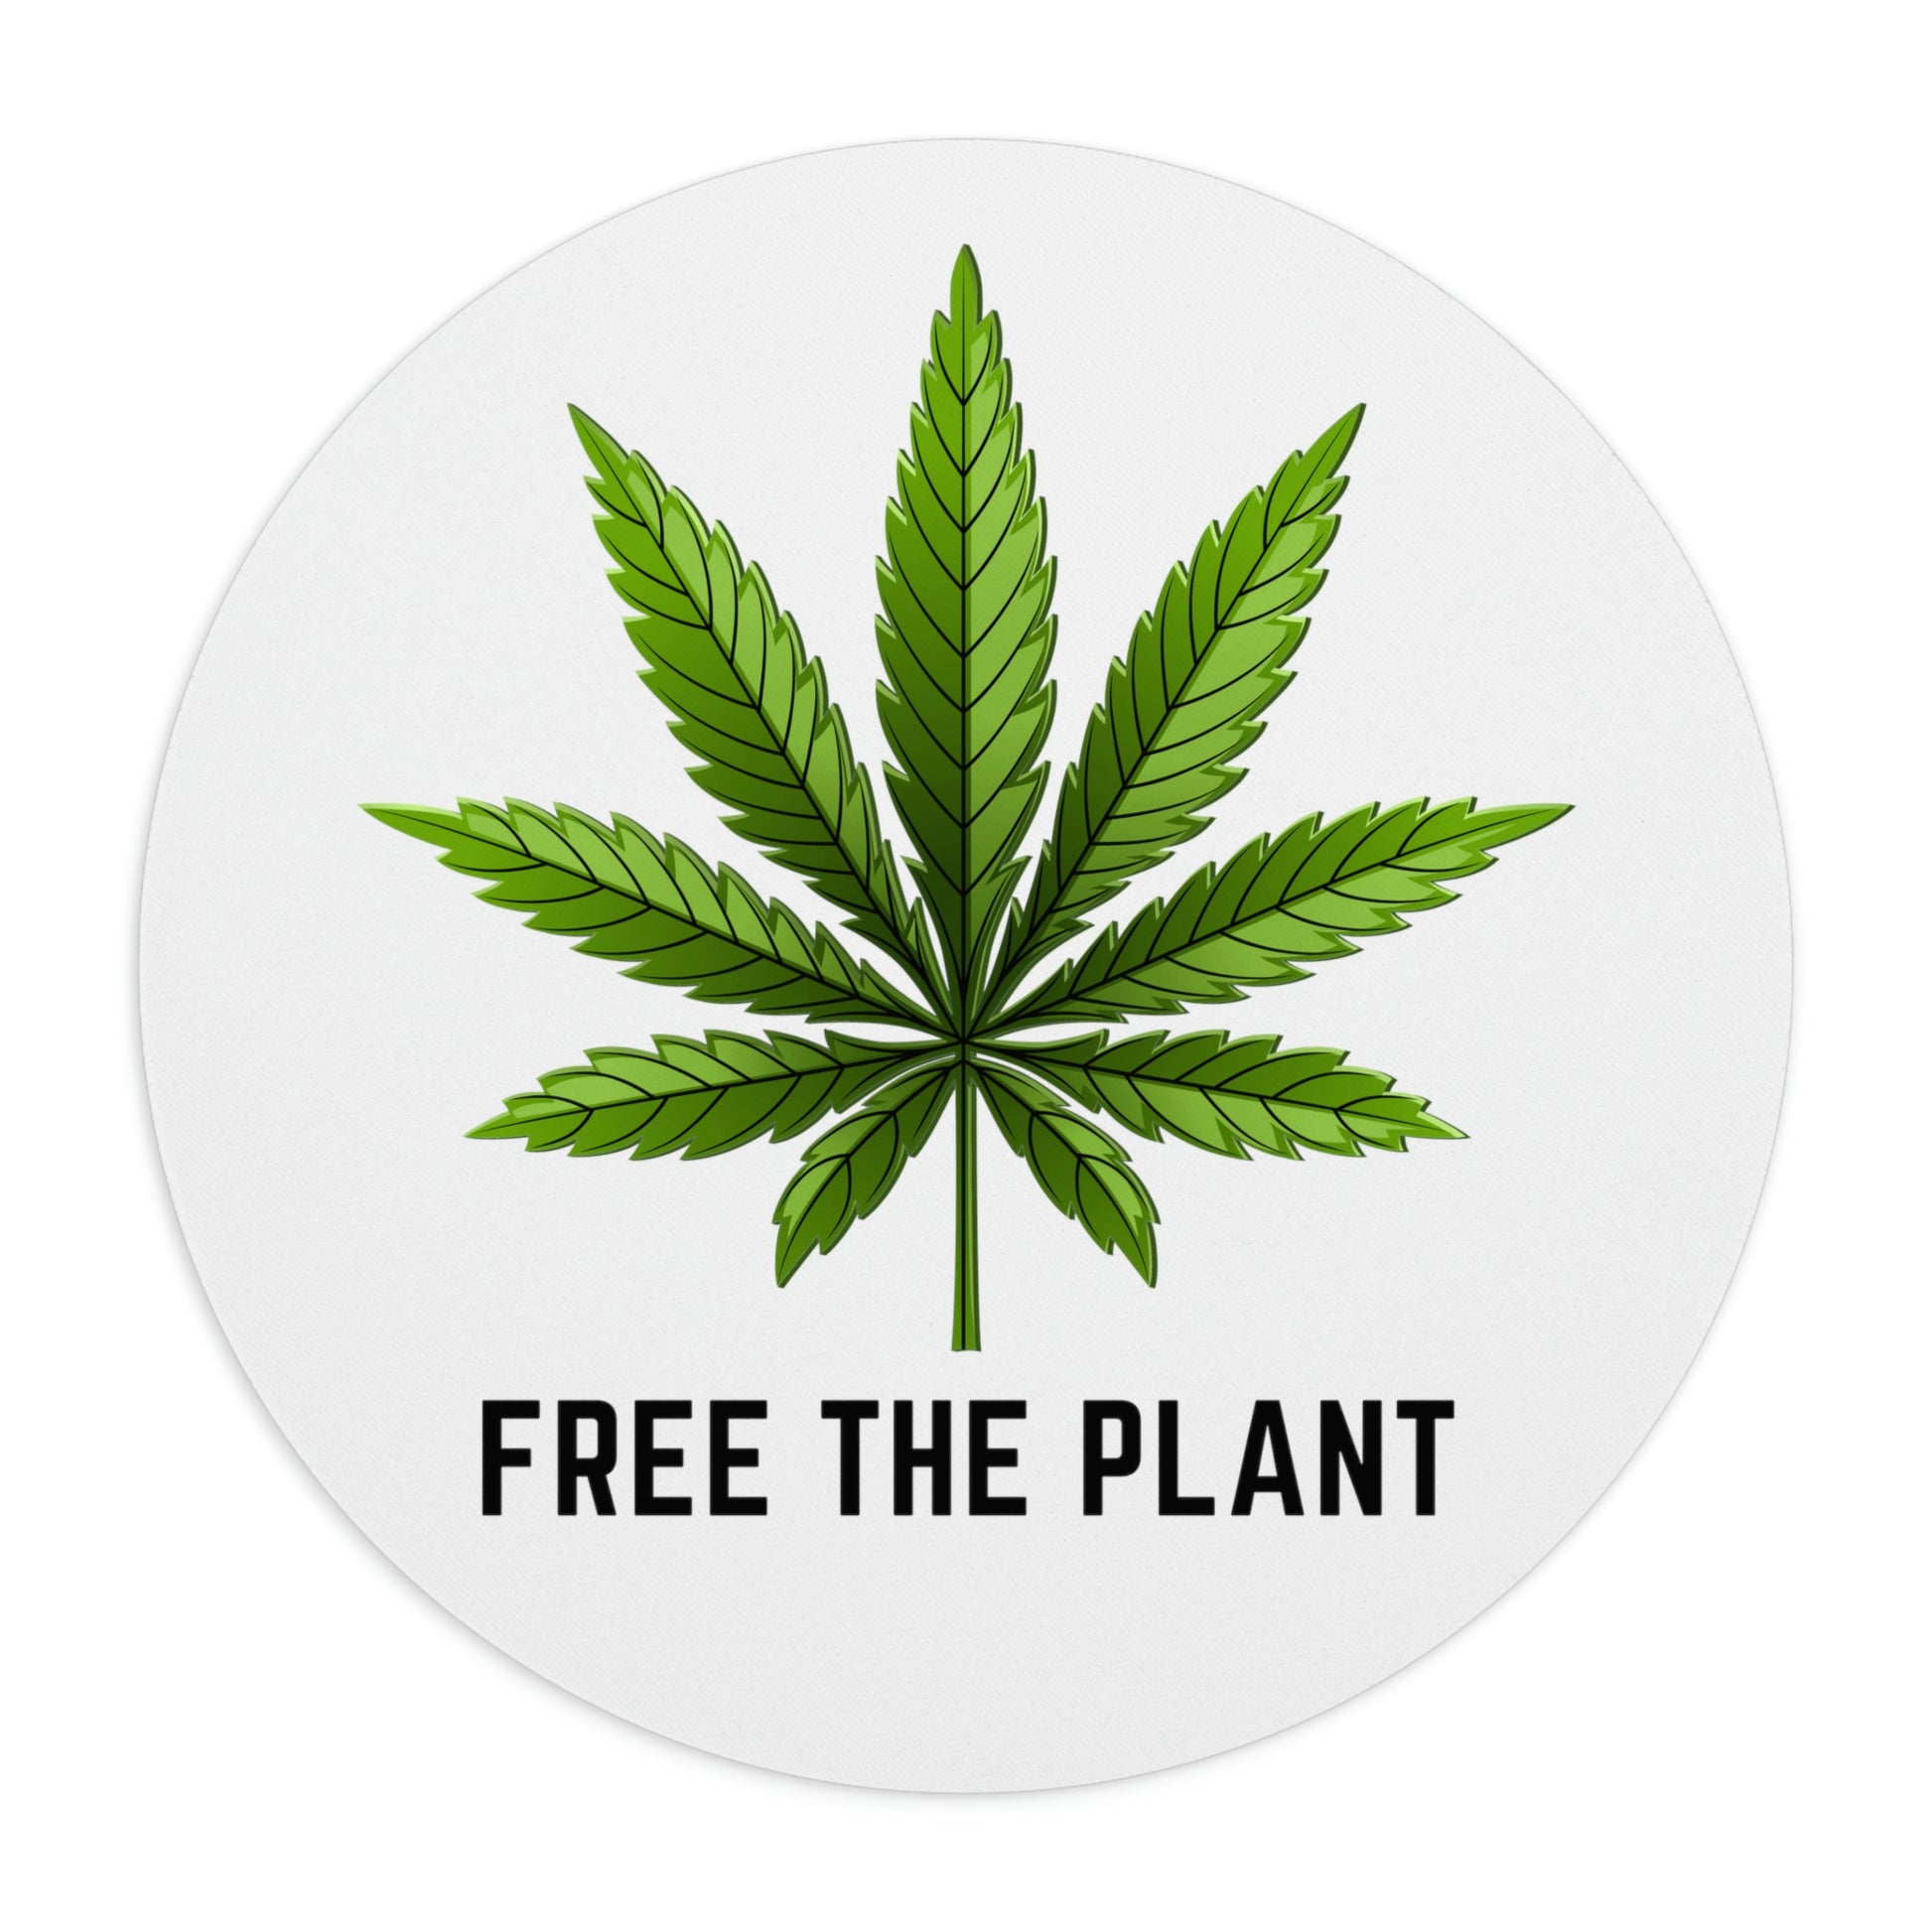 Free the Plant Weed Mouse Pad the sticker.